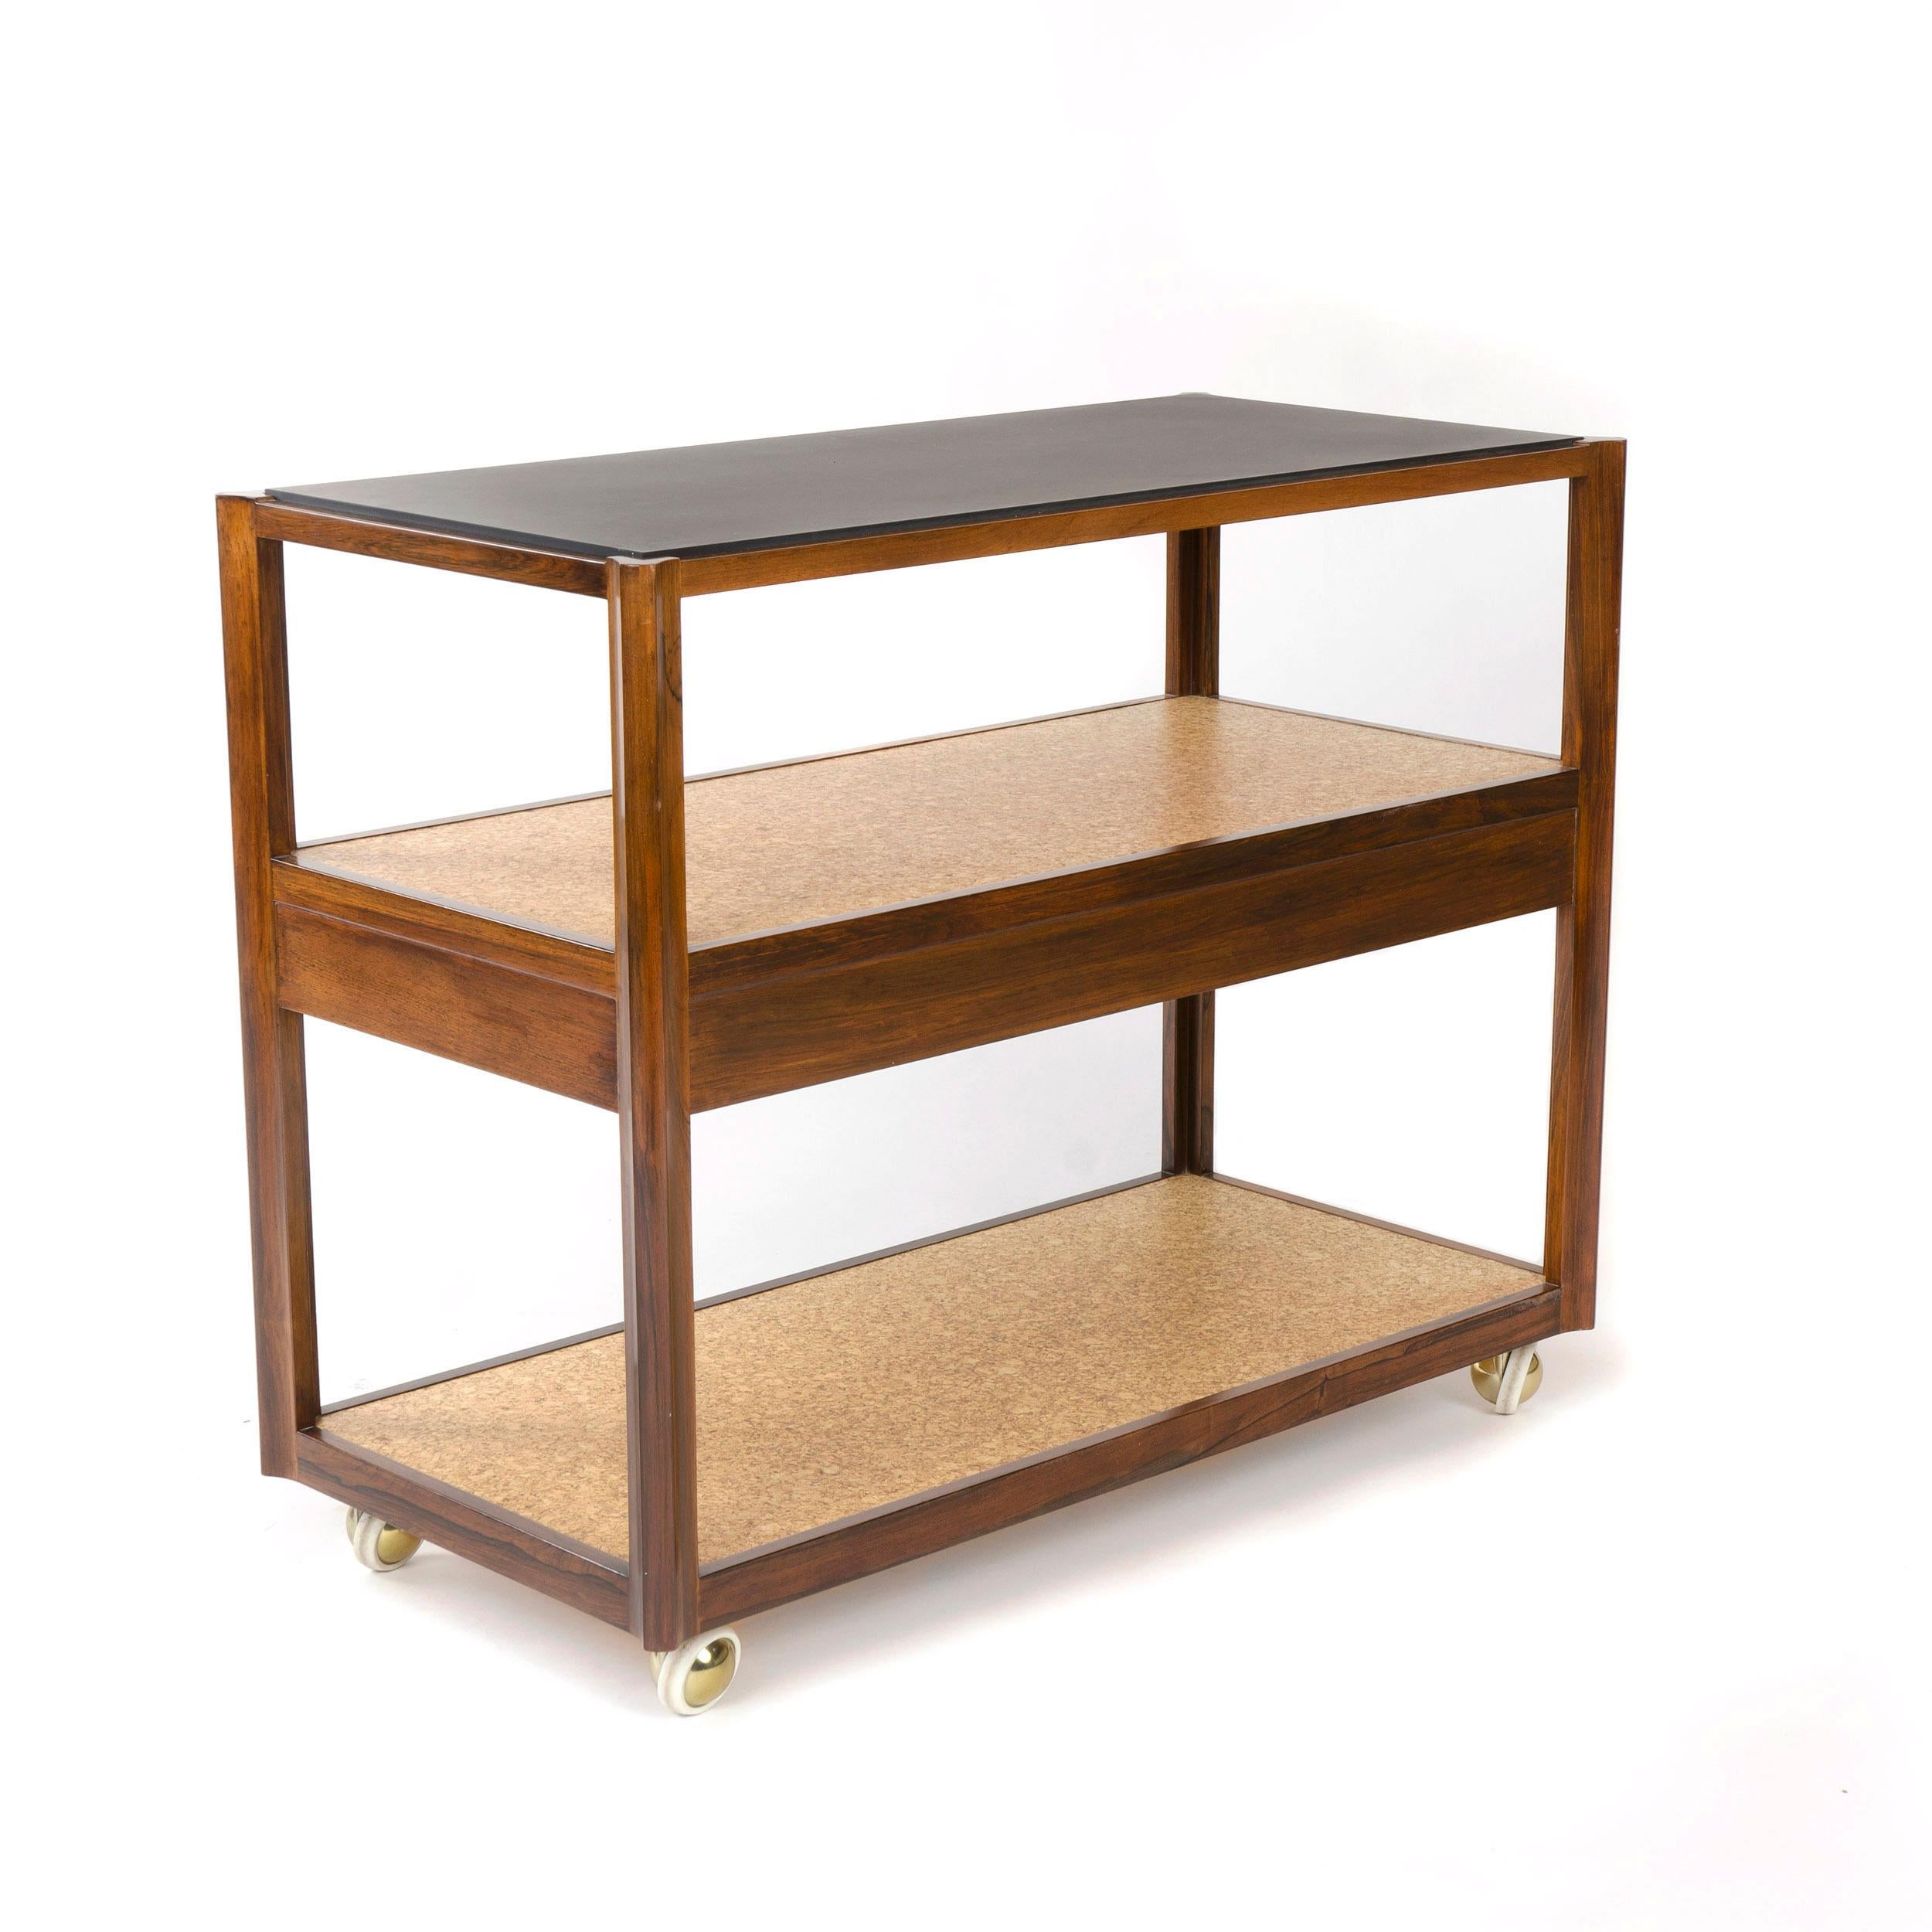 Rosewood framed three tier service or utility cart. The top tier has an inset slate top above two cork shelves with the middle shelf having a blind pull suspended drawer for miscellaneous storage. The frame is mobile via four Shepard ball castors in